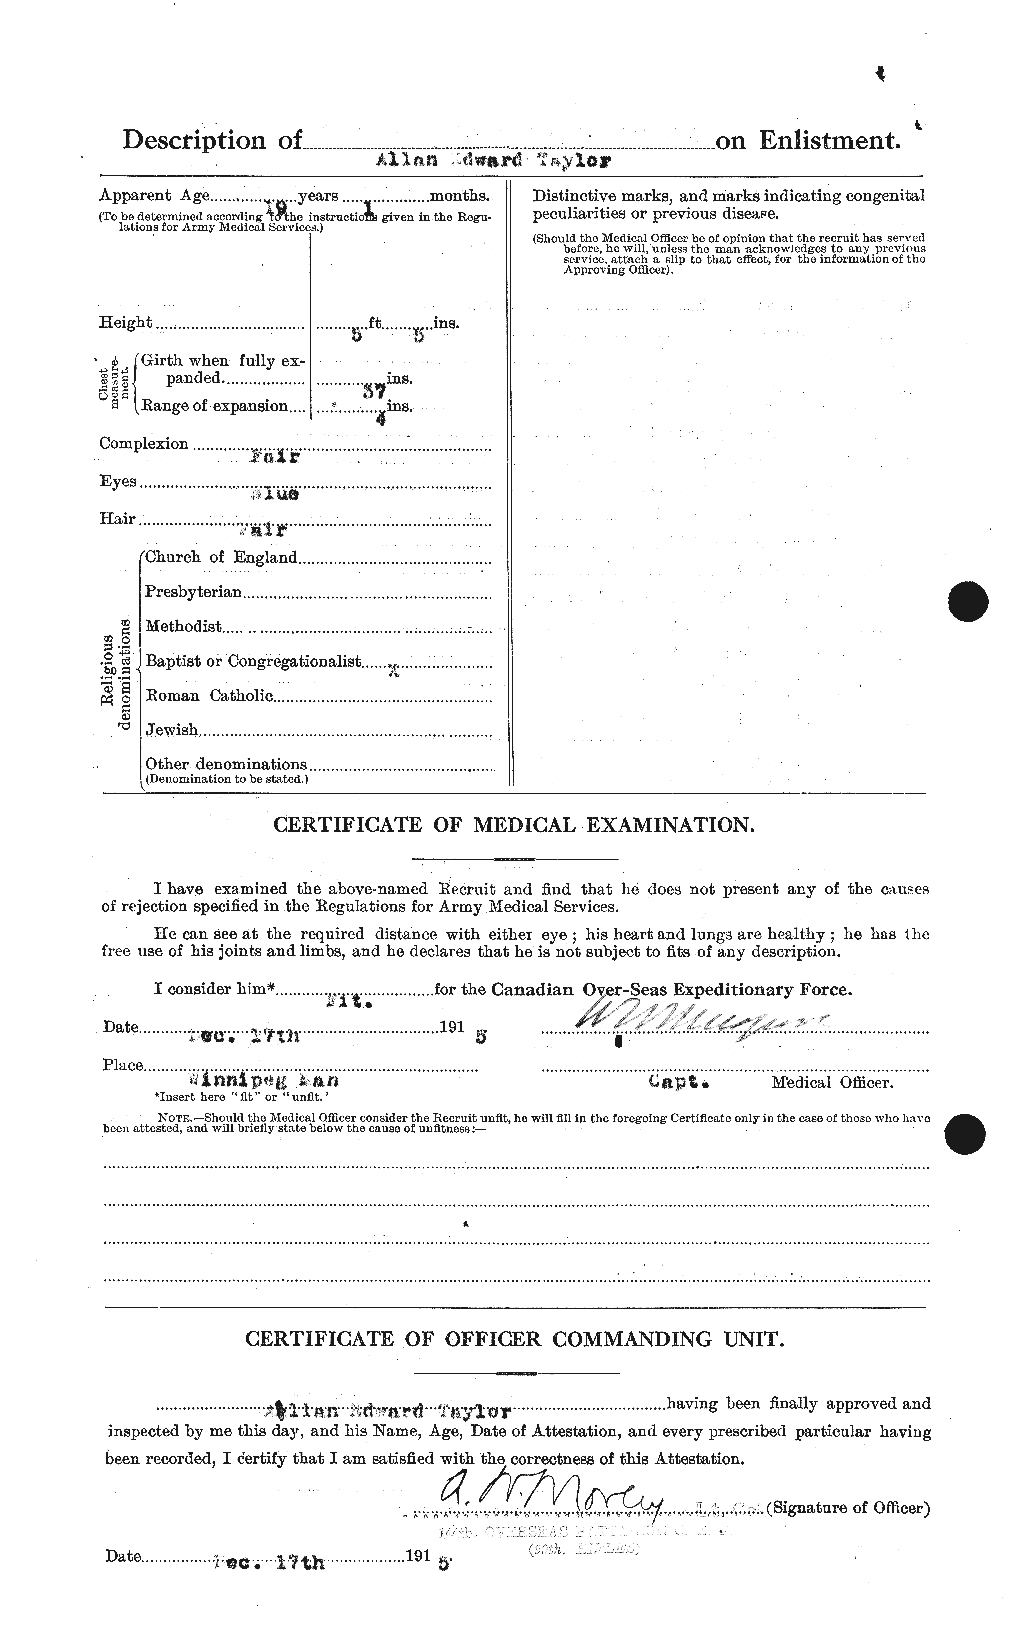 Personnel Records of the First World War - CEF 626203b